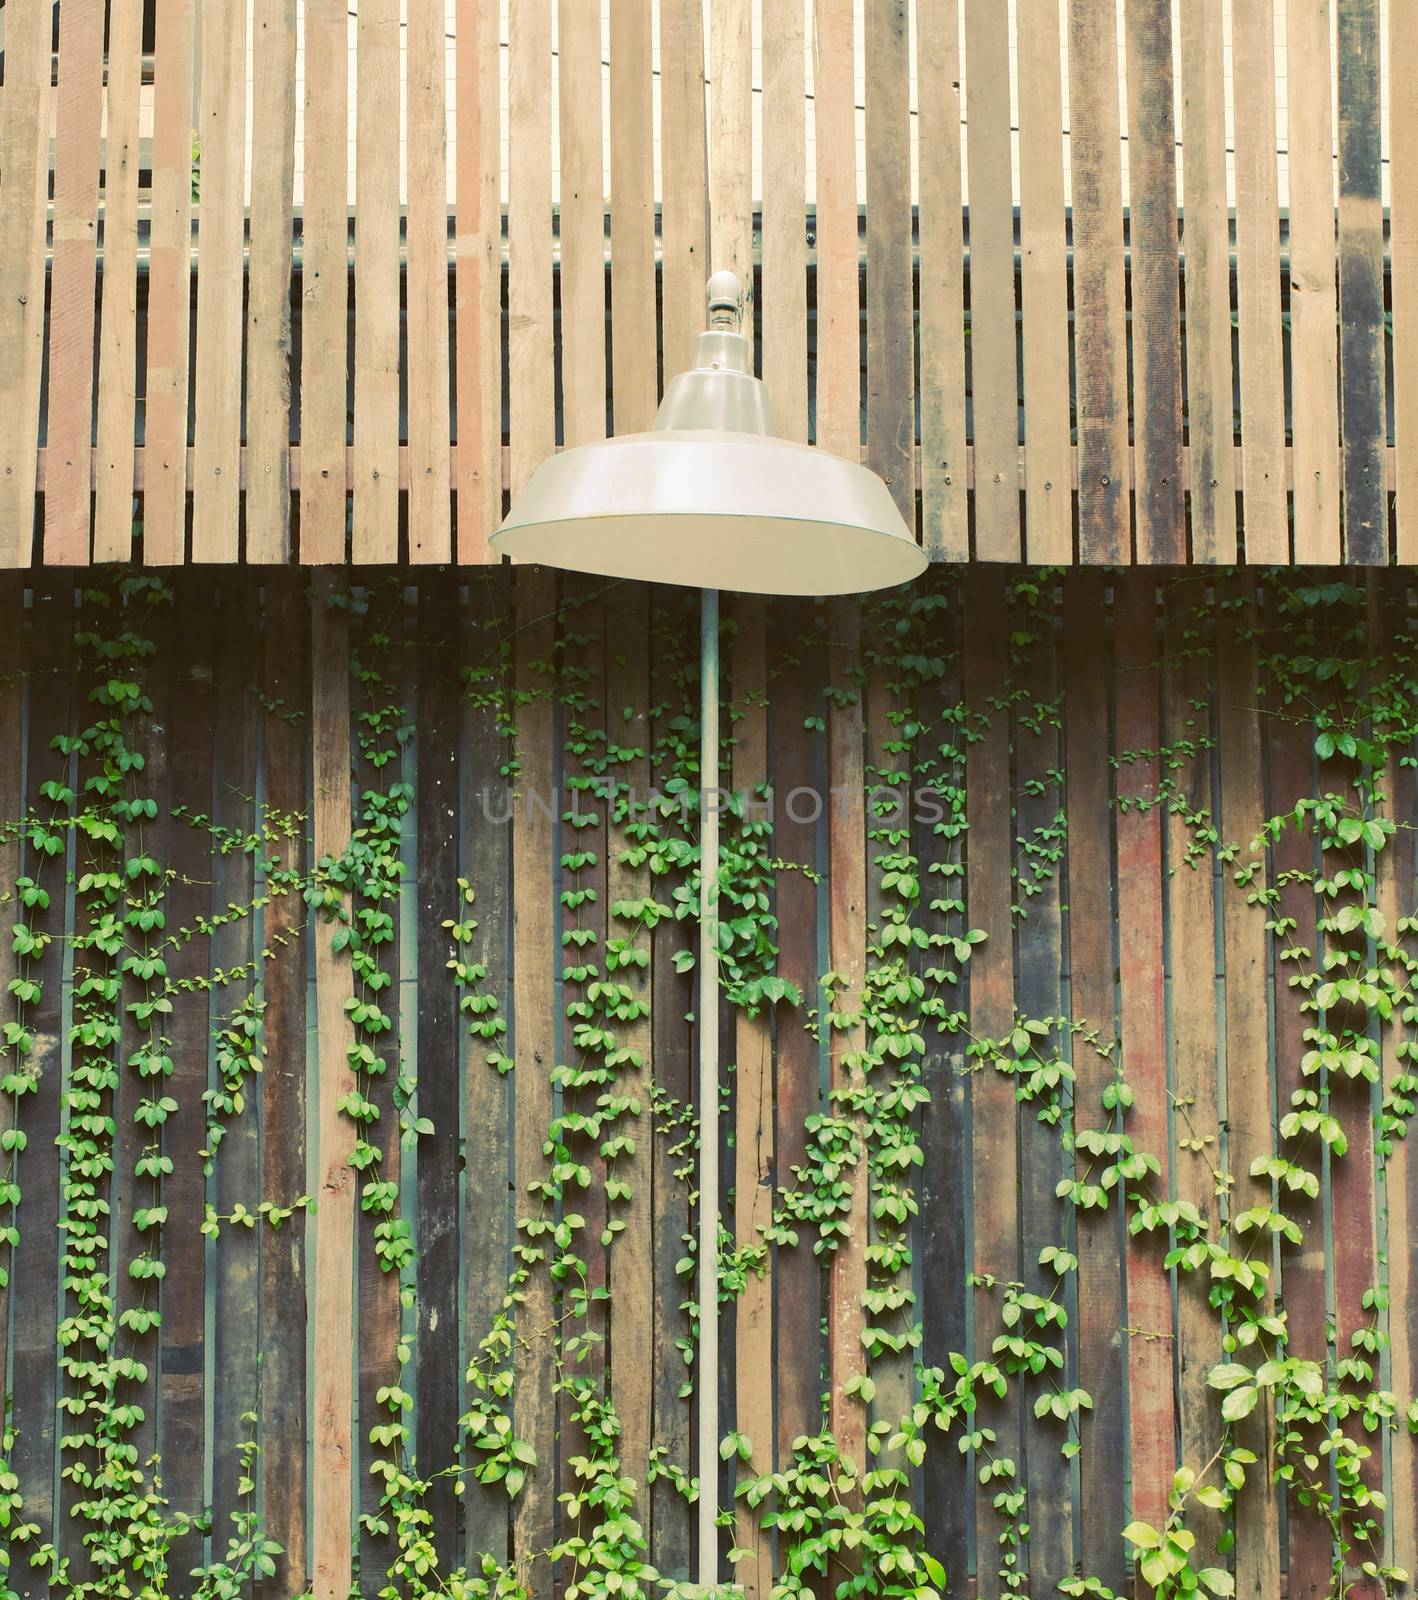 Old lamp hanging outdoor with wooden wall and ivy plant